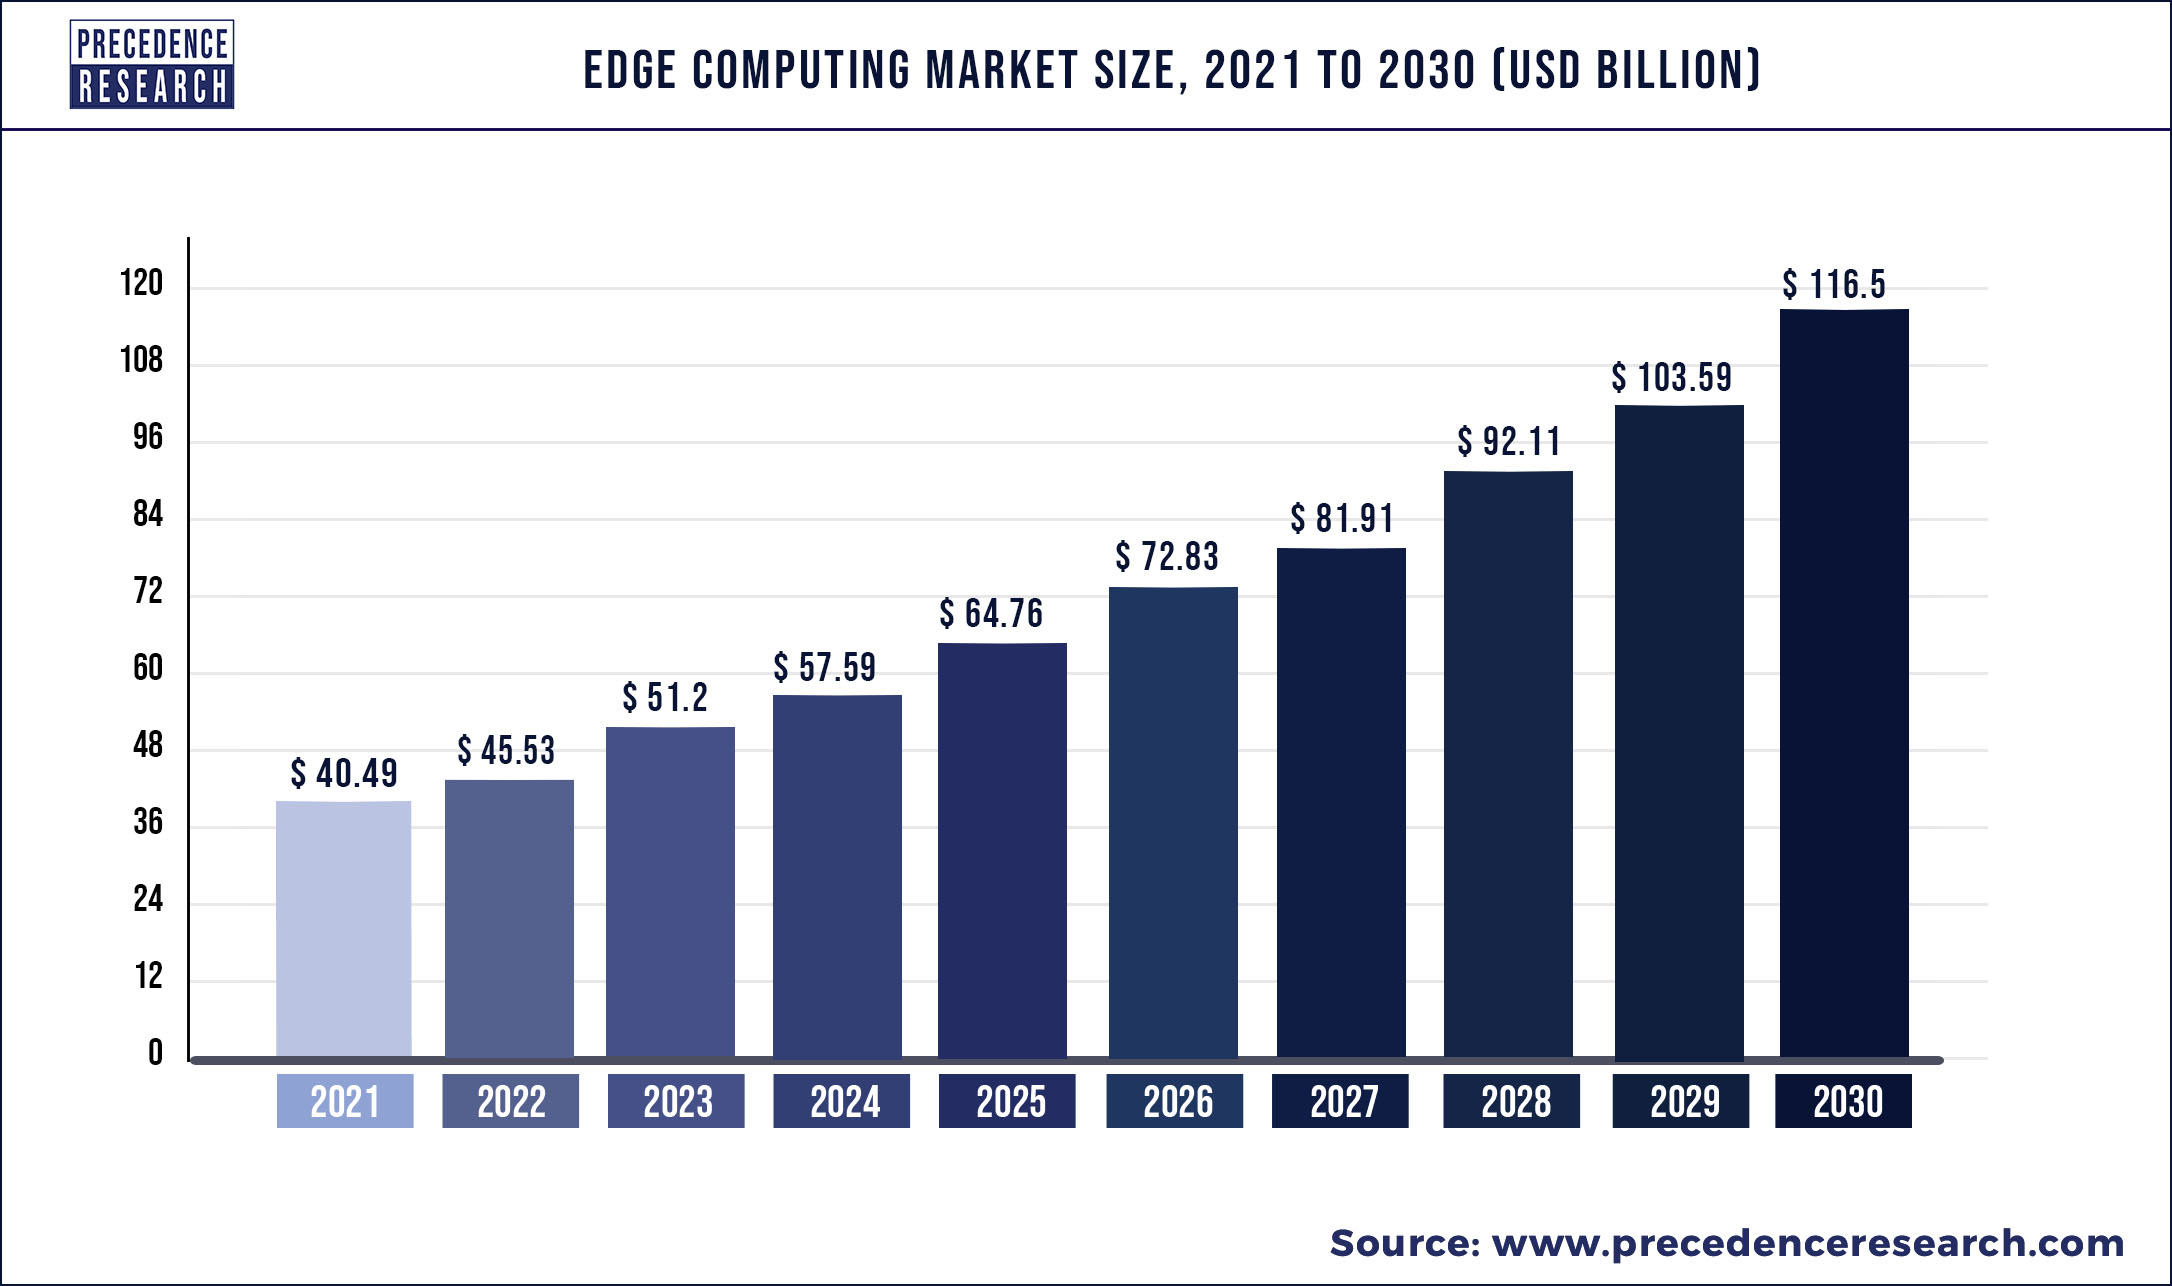 Edge Computing Market Size is Forecasted to Reach US$ 116.5 Billion by 2030